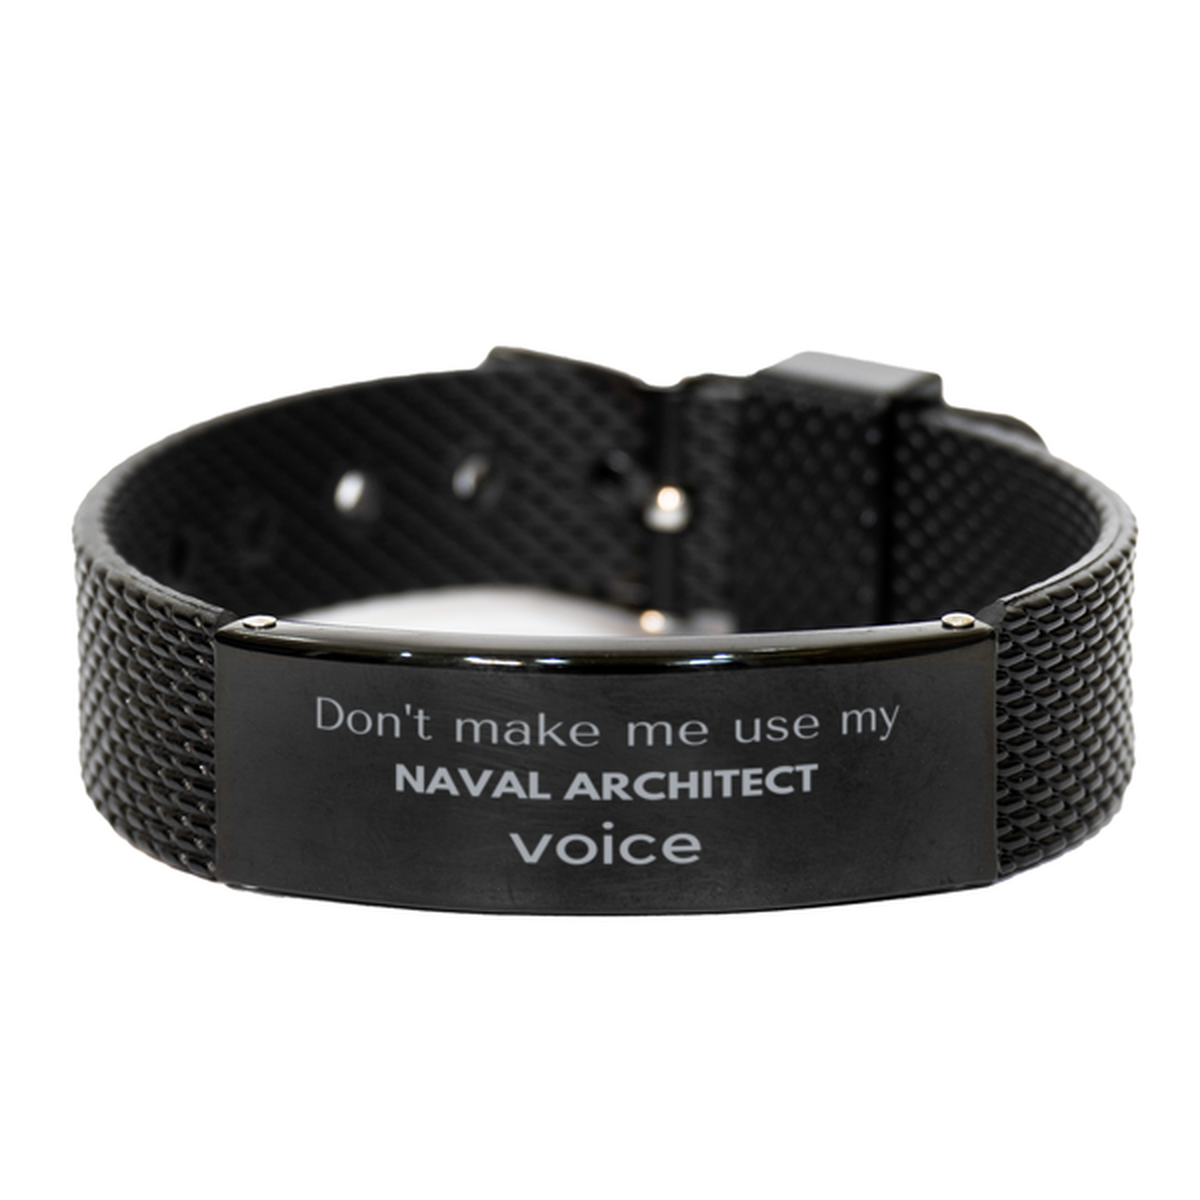 Don't make me use my Naval Architect voice, Sarcasm Naval Architect Gifts, Christmas Naval Architect Black Shark Mesh Bracelet Birthday Unique Gifts For Naval Architect Coworkers, Men, Women, Colleague, Friends